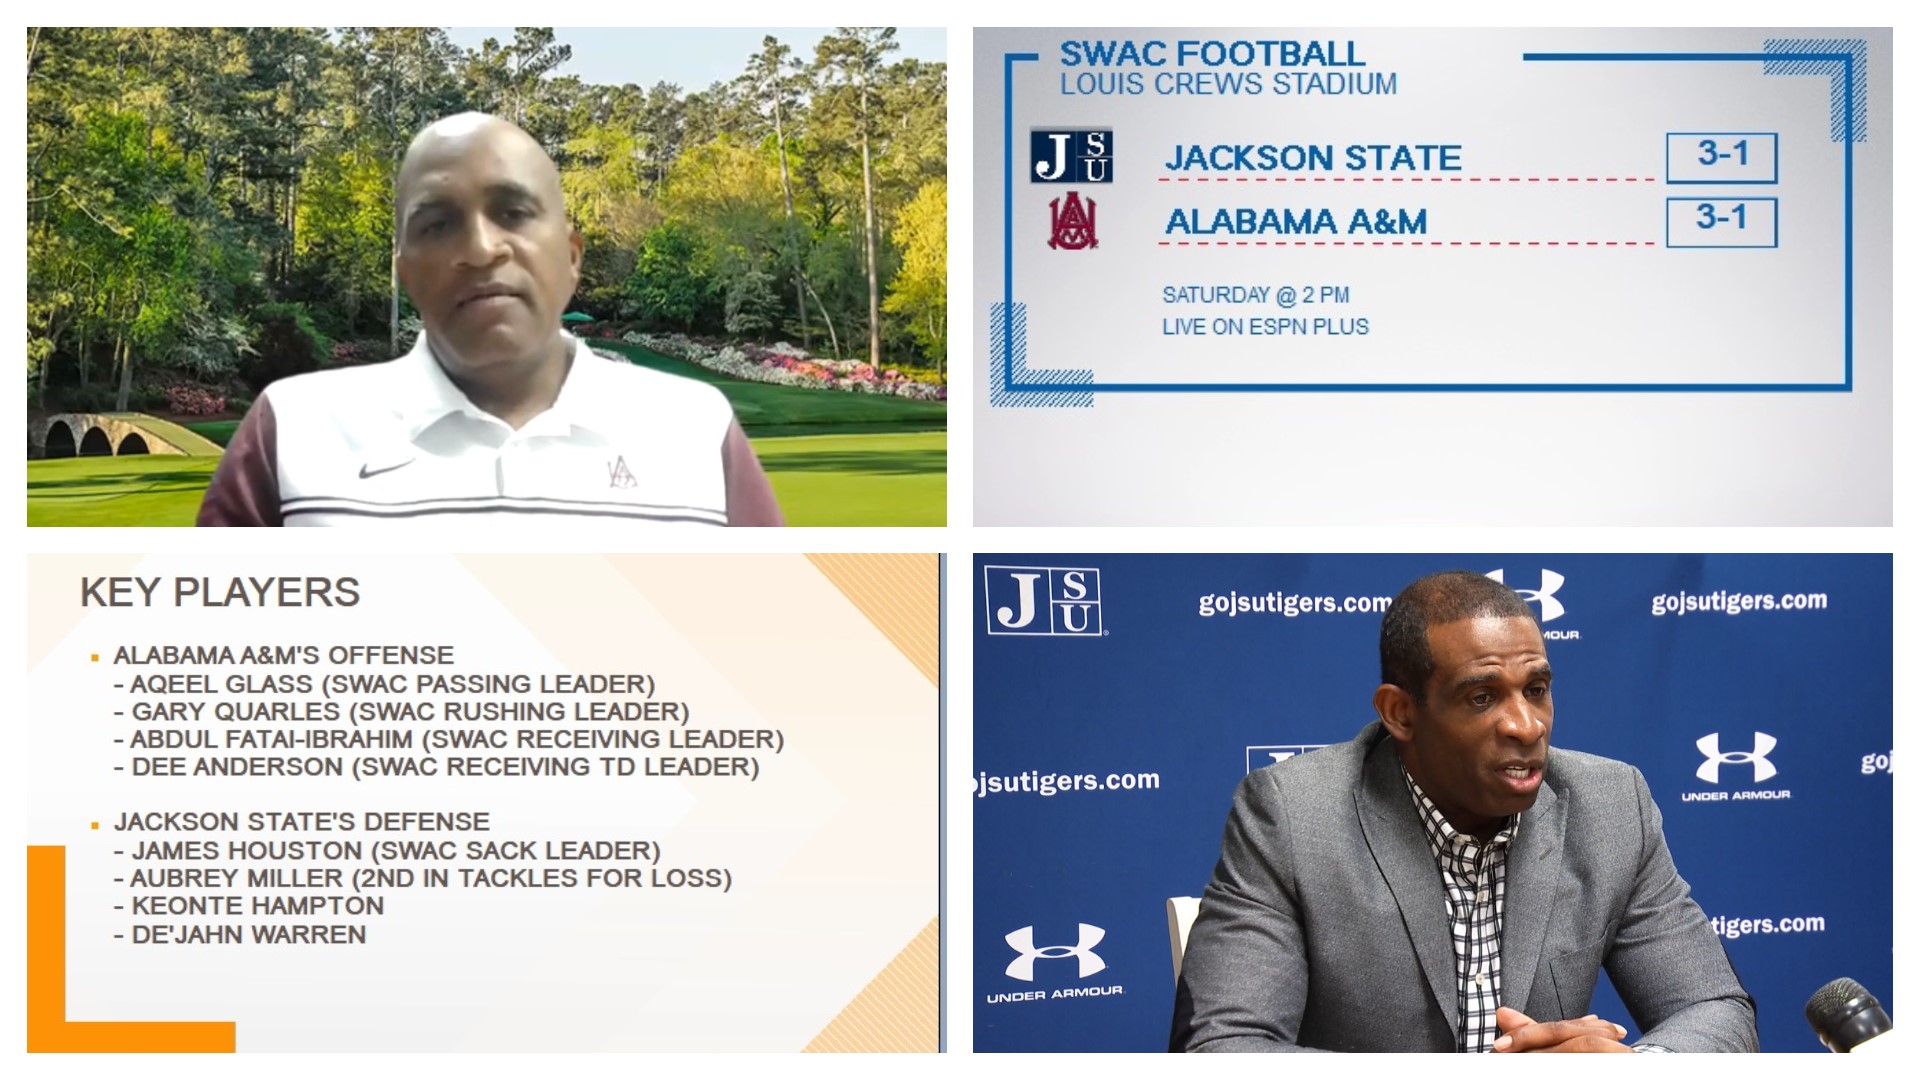 On Saturday, watch out when Alabama A&M's high powered offense goes head-to-head against Jackson State's vaunted defense. Both units are ranked 1st in the SWAC.